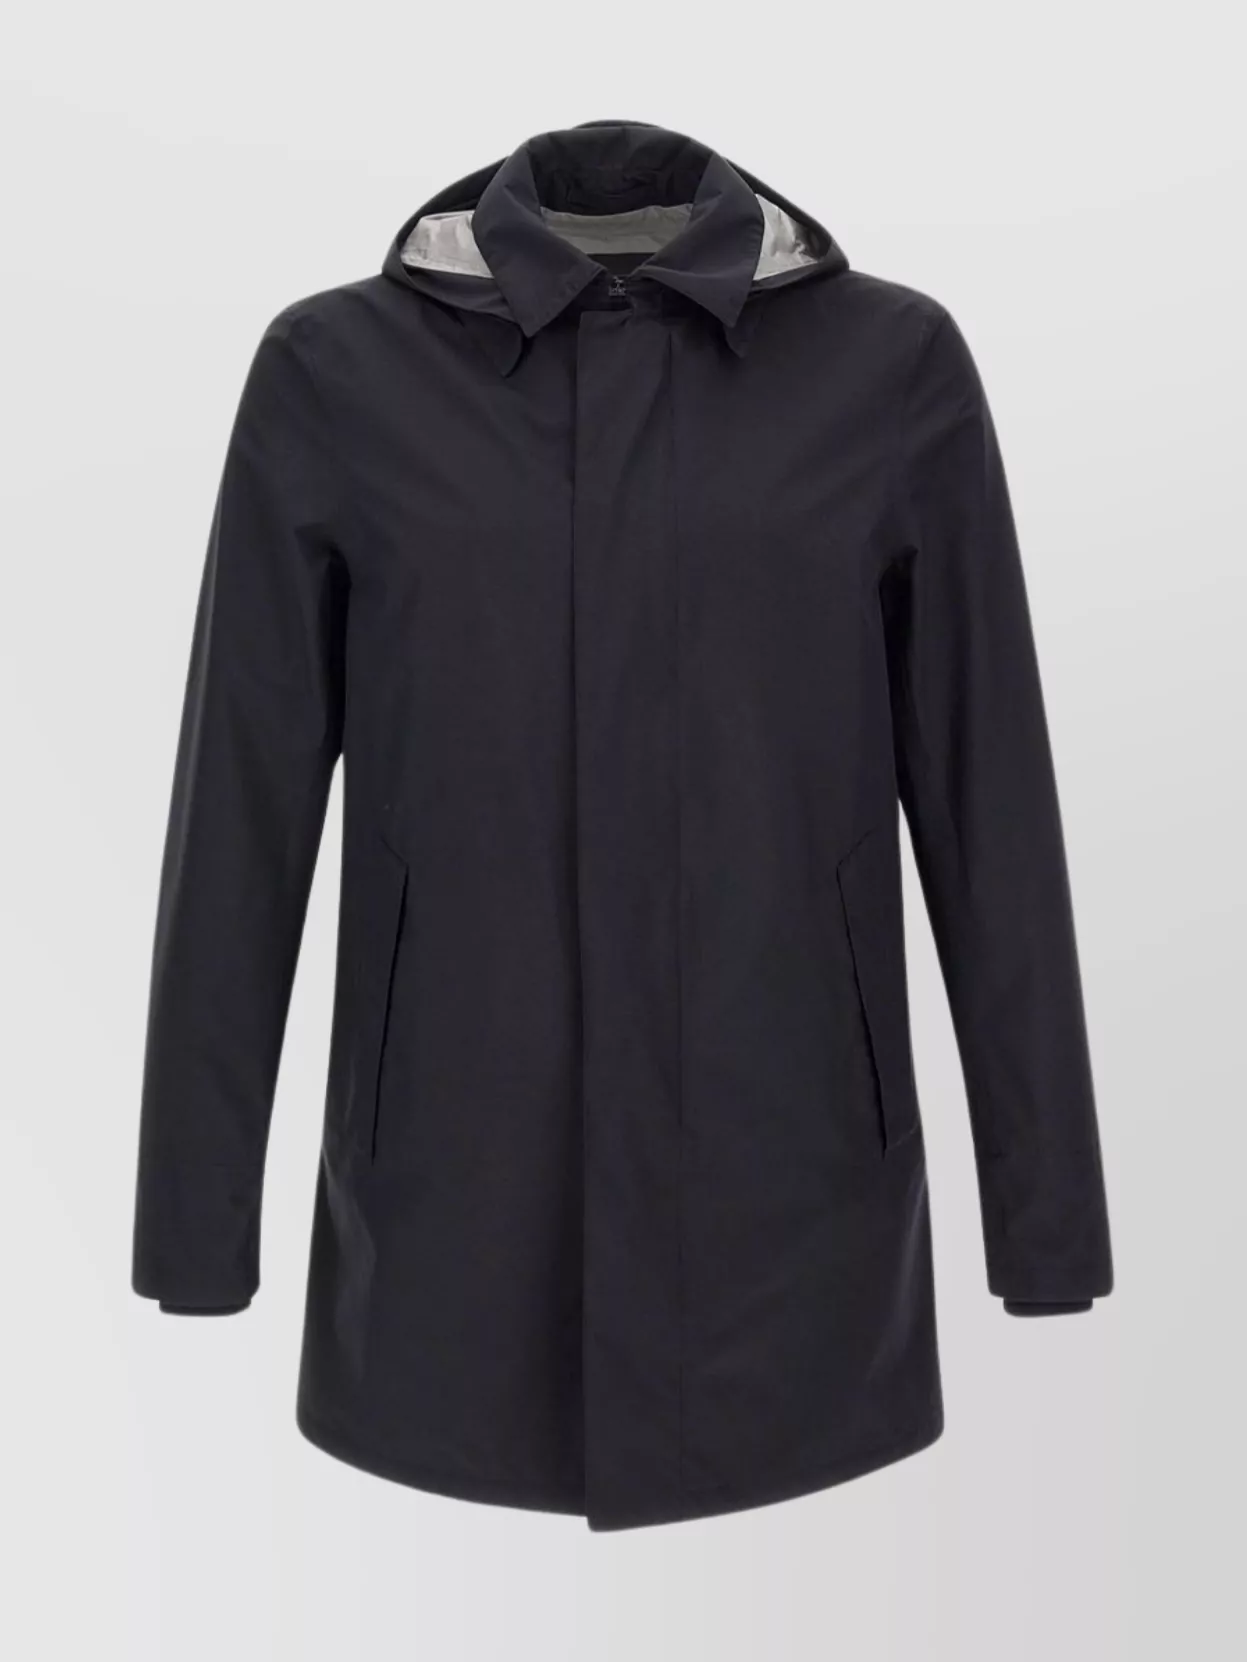 Shop Herno Goretex Paclite Raincoat With Hood And Pockets